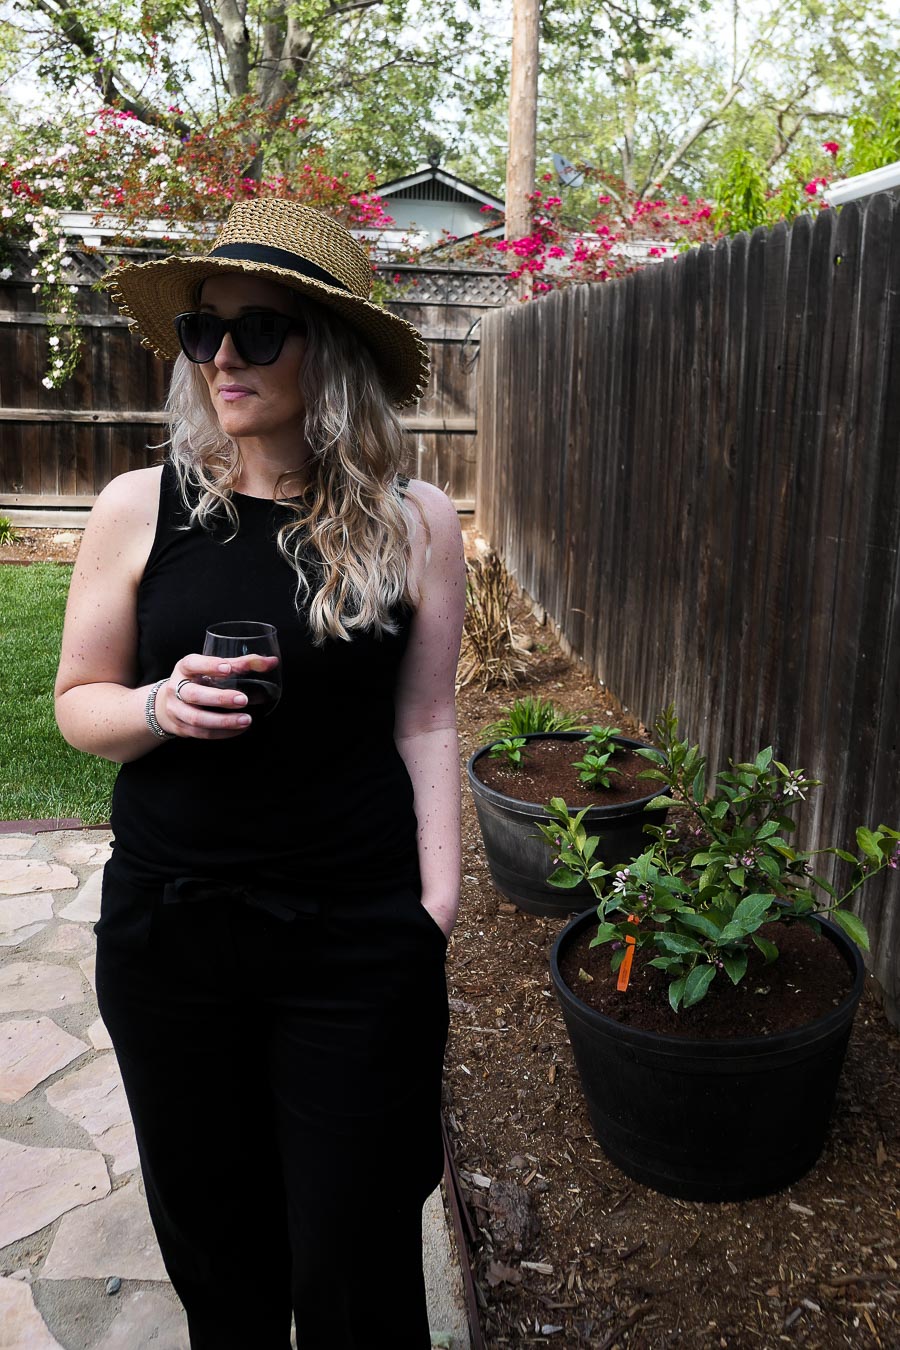 Black tank Top Outfit with Straw Hat - Must Have Accessory